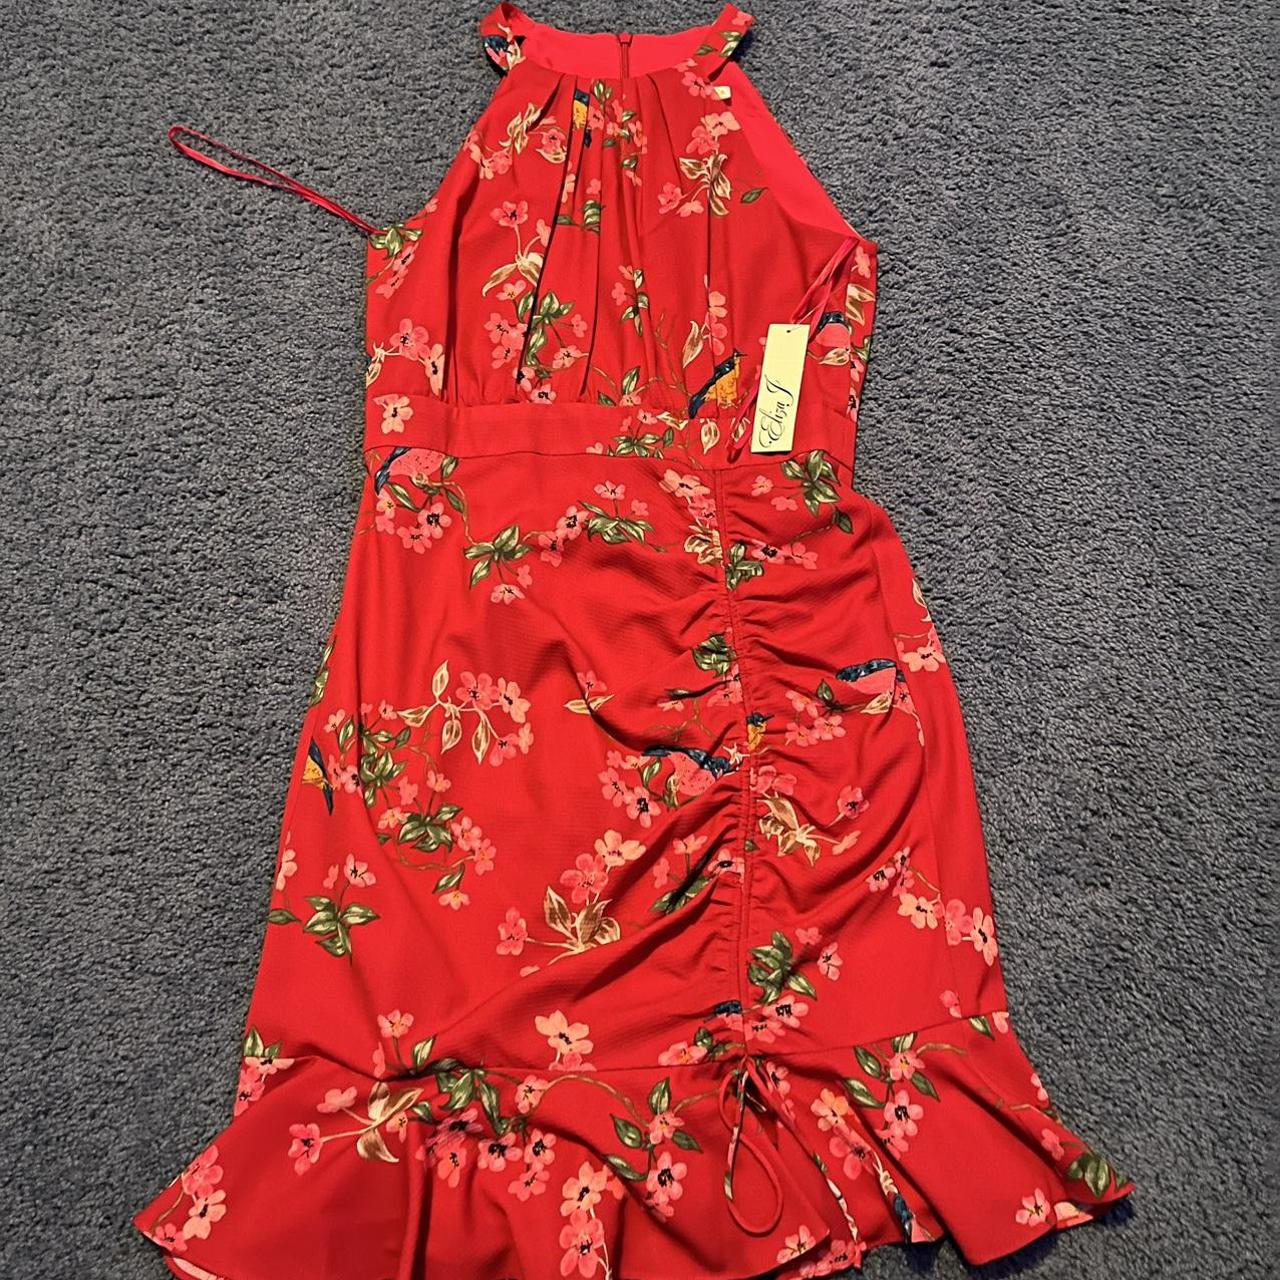 Eliza J red floral dress brand new with tags size... - Depop